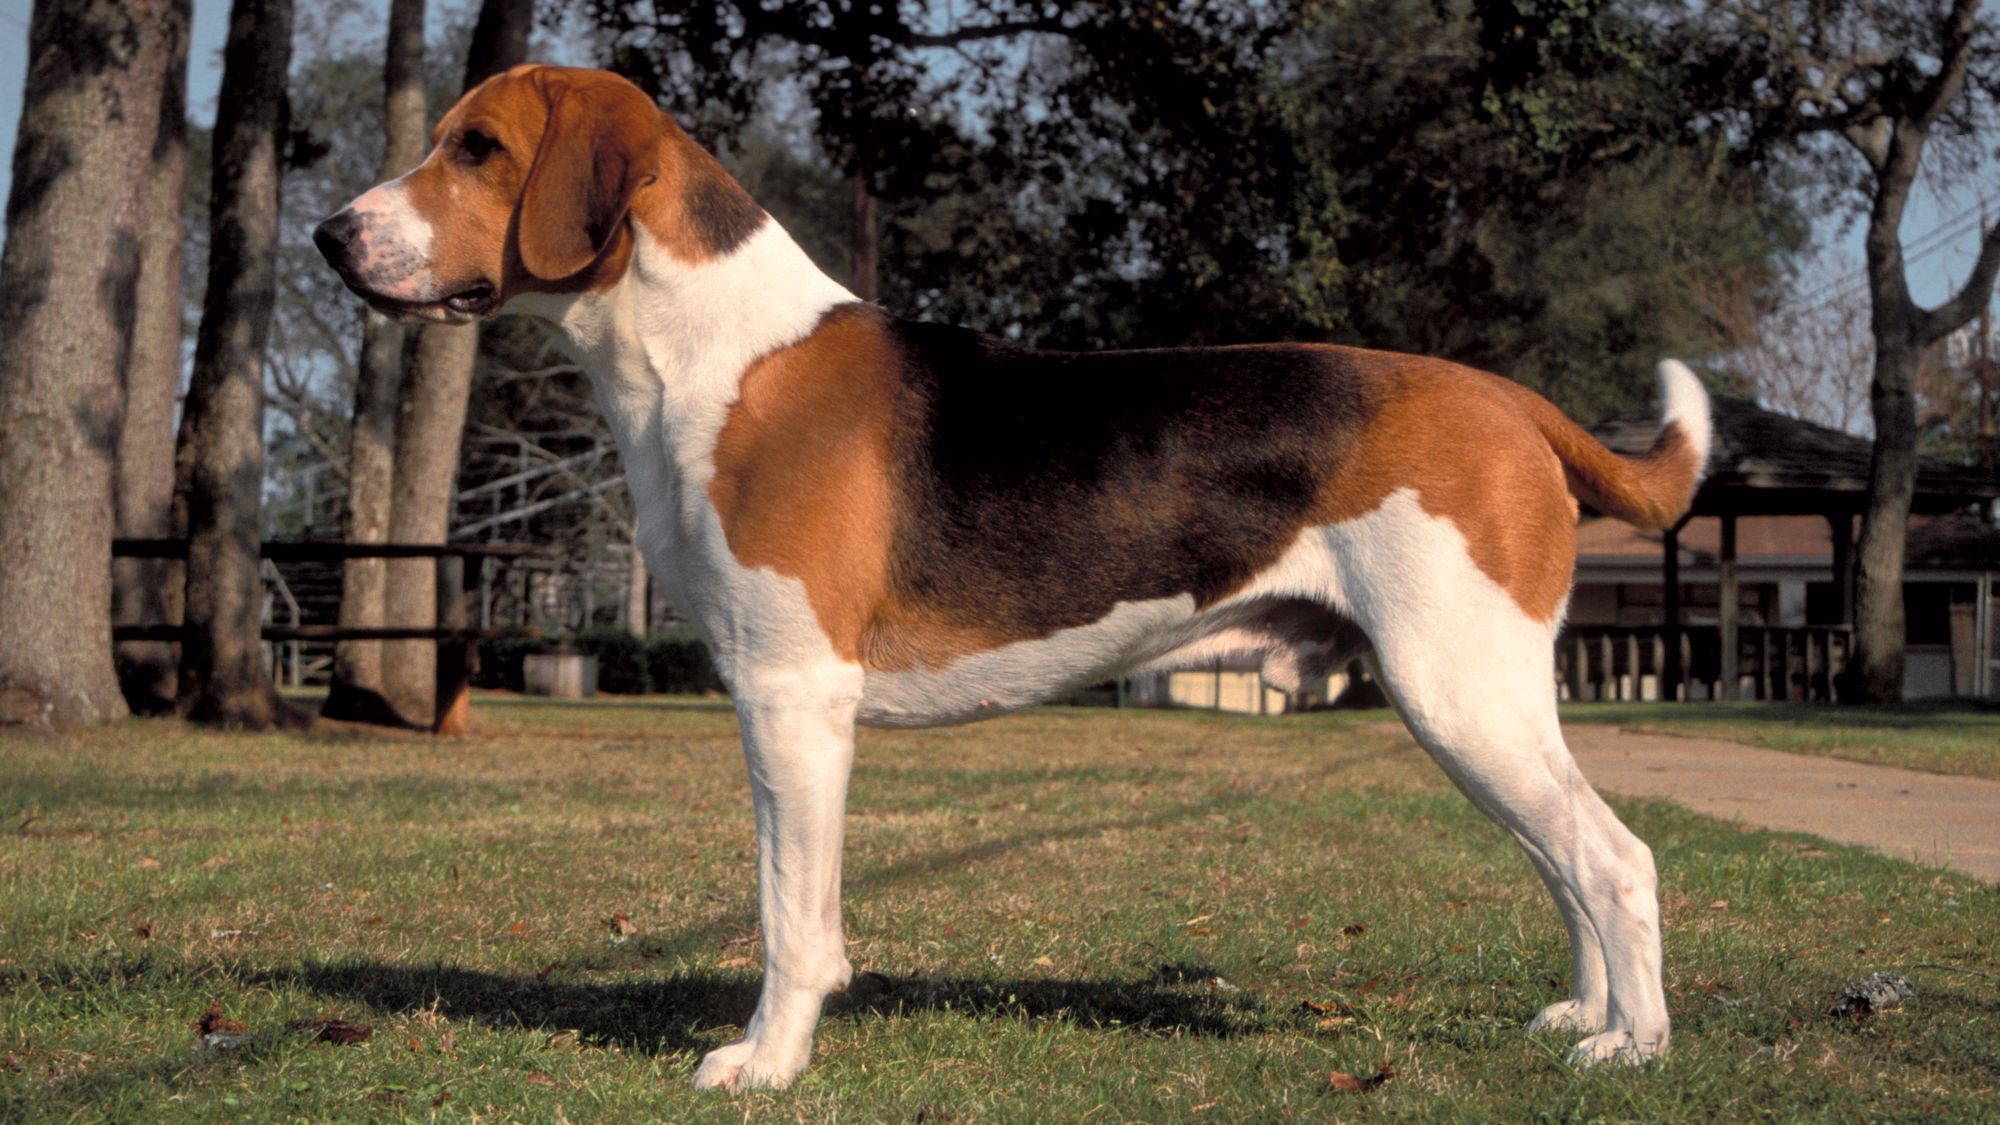 Beagle Harrier stood in front of a county house